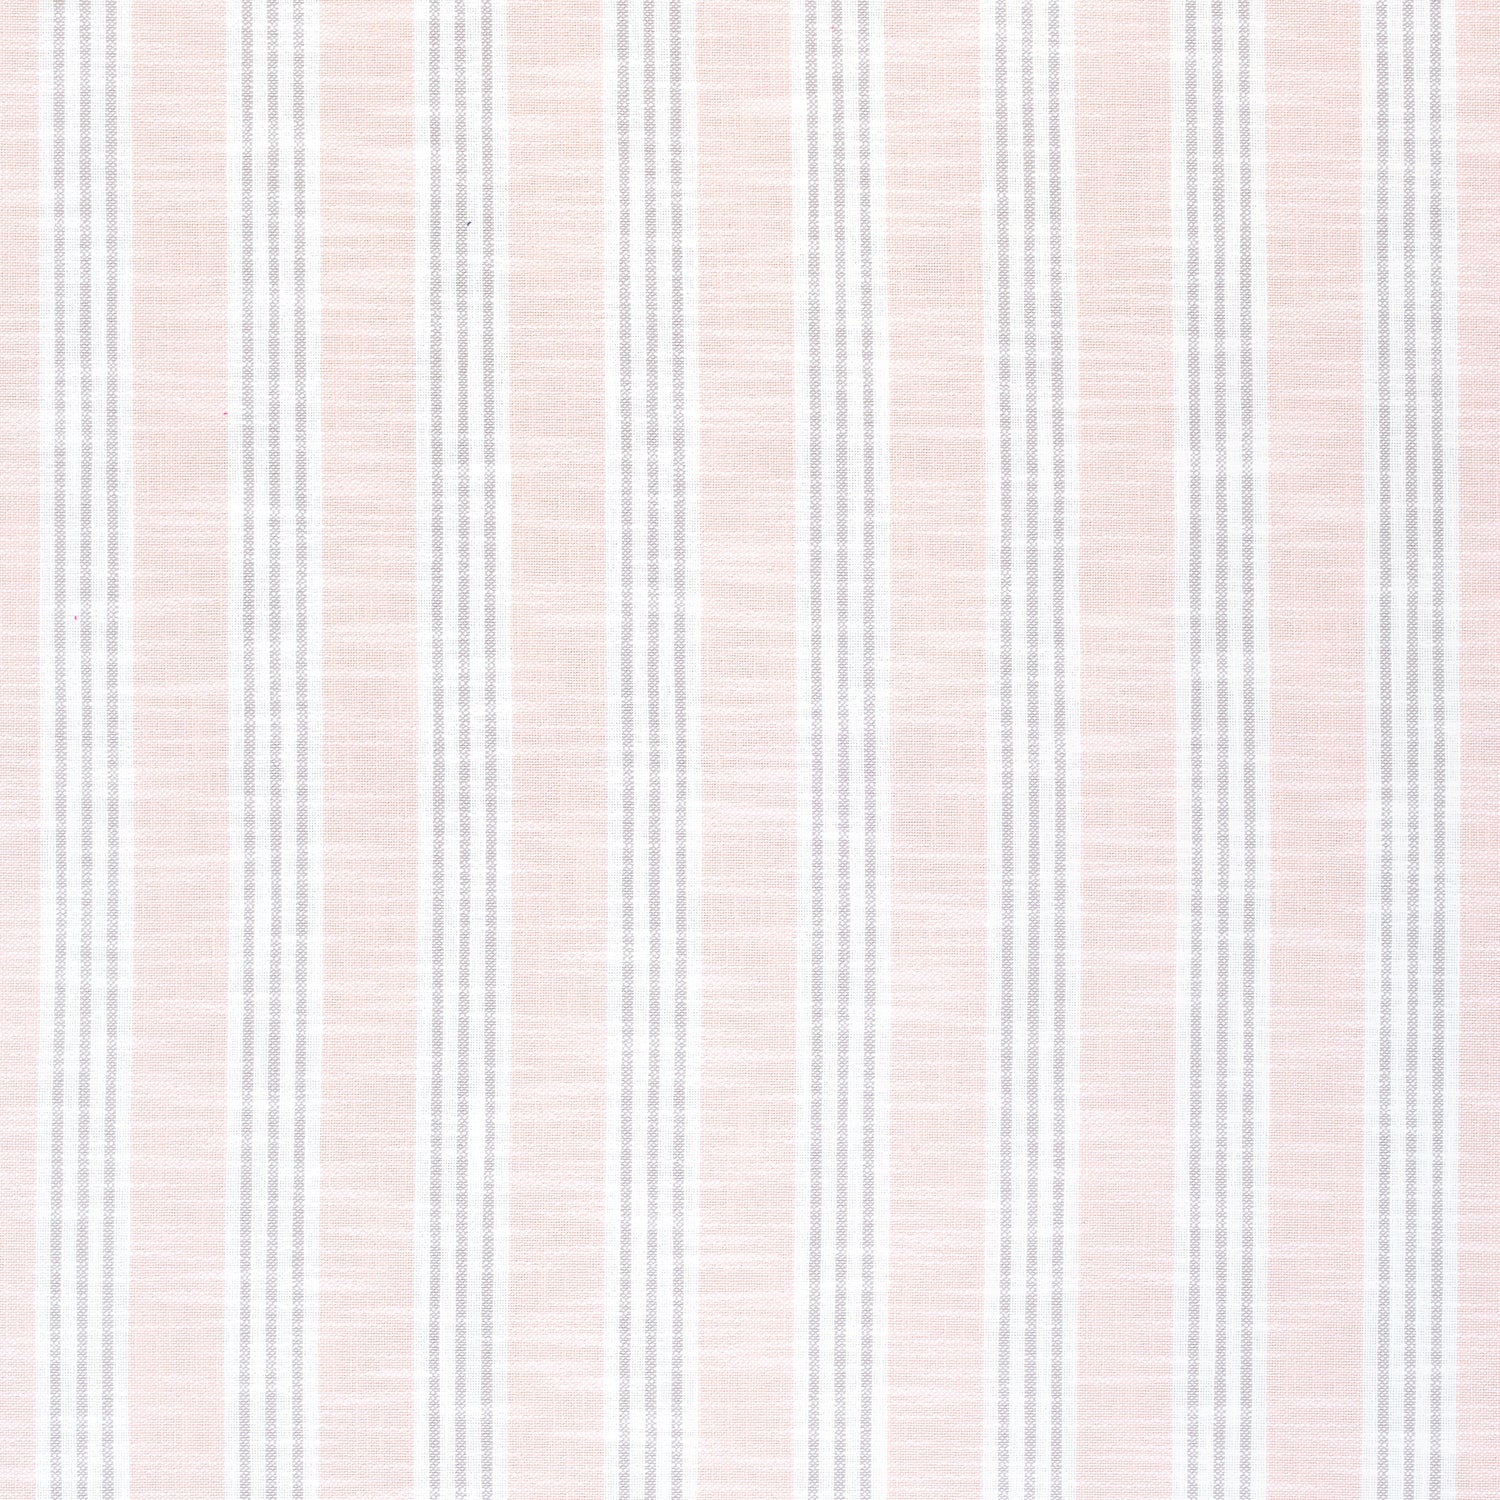 Southport Stripe fabric in blush and mushroom color - pattern number W73482 - by Thibaut in the Landmark collection